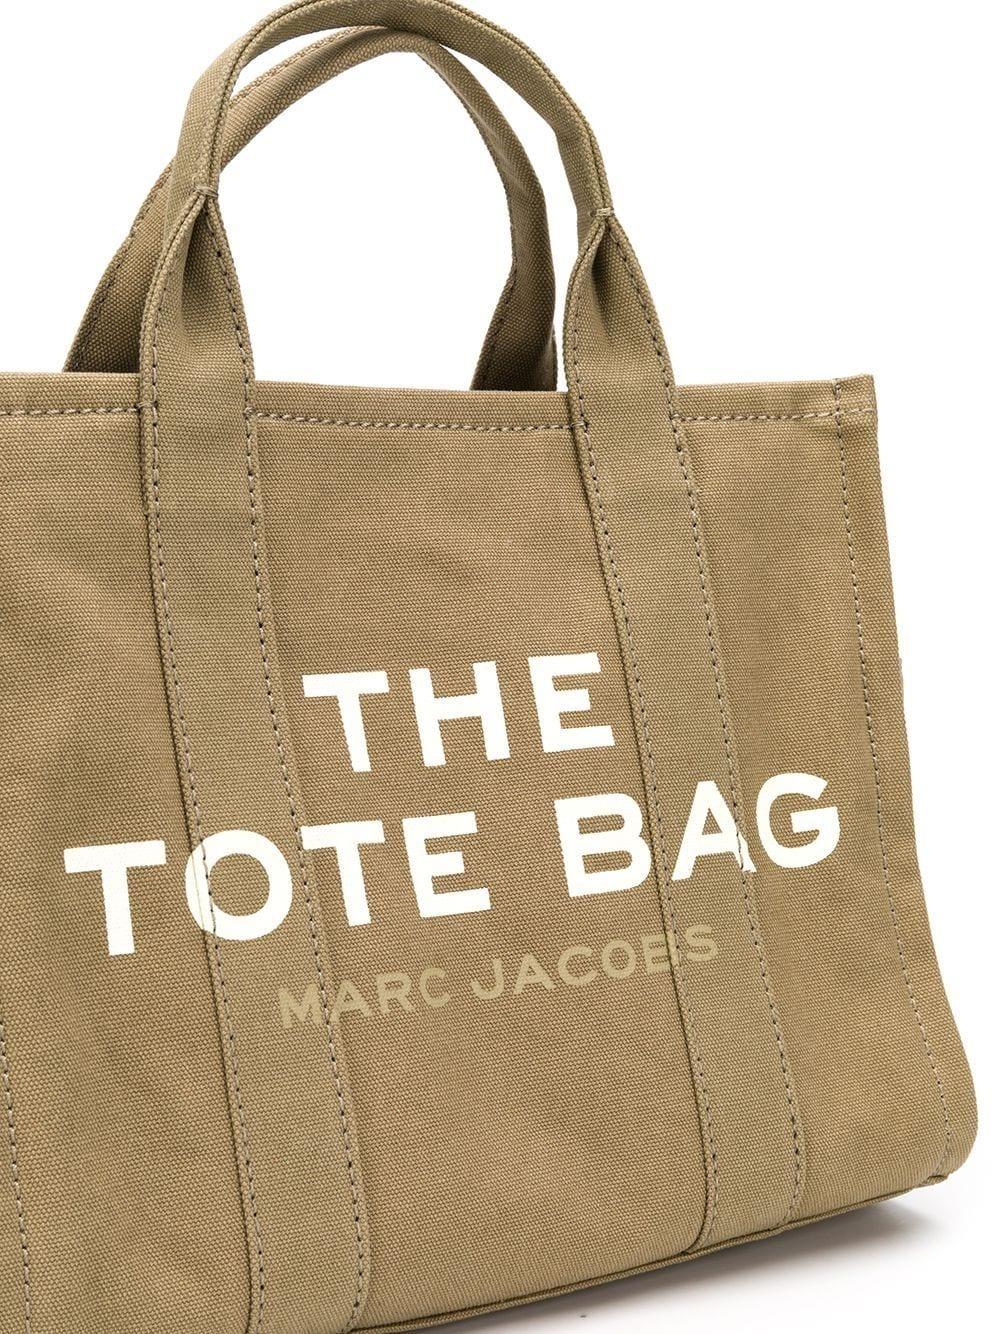 Marc Jacobs The Small Traveler Tote Bag in Green - Lyst